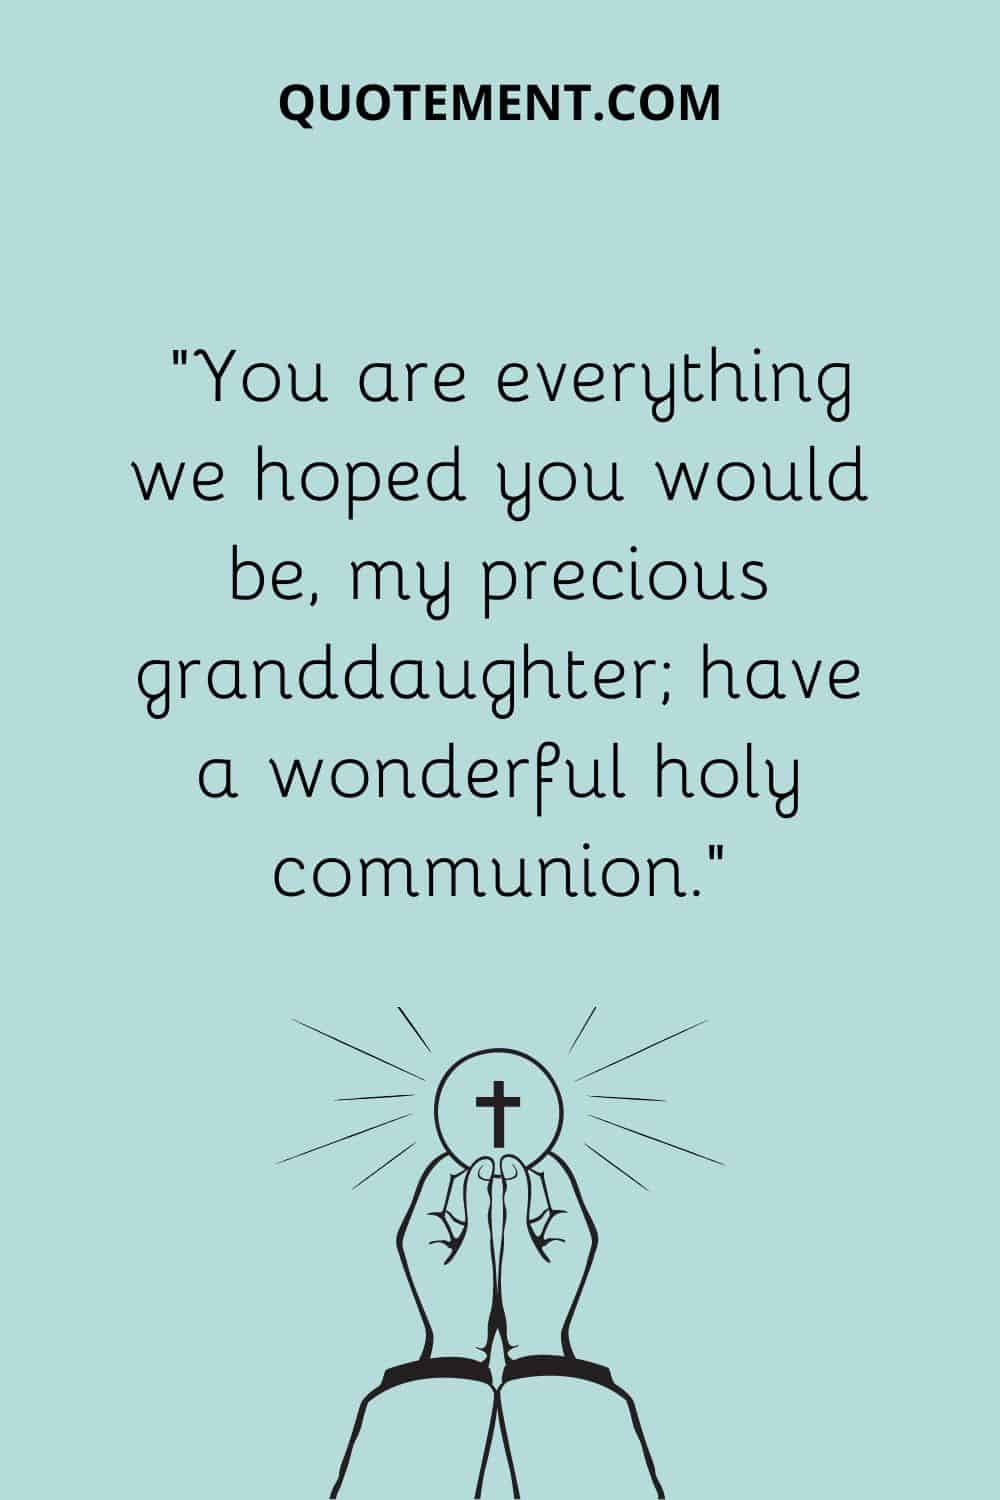 “You are everything we hoped you would be, my precious granddaughter; have a wonderful holy communion.”